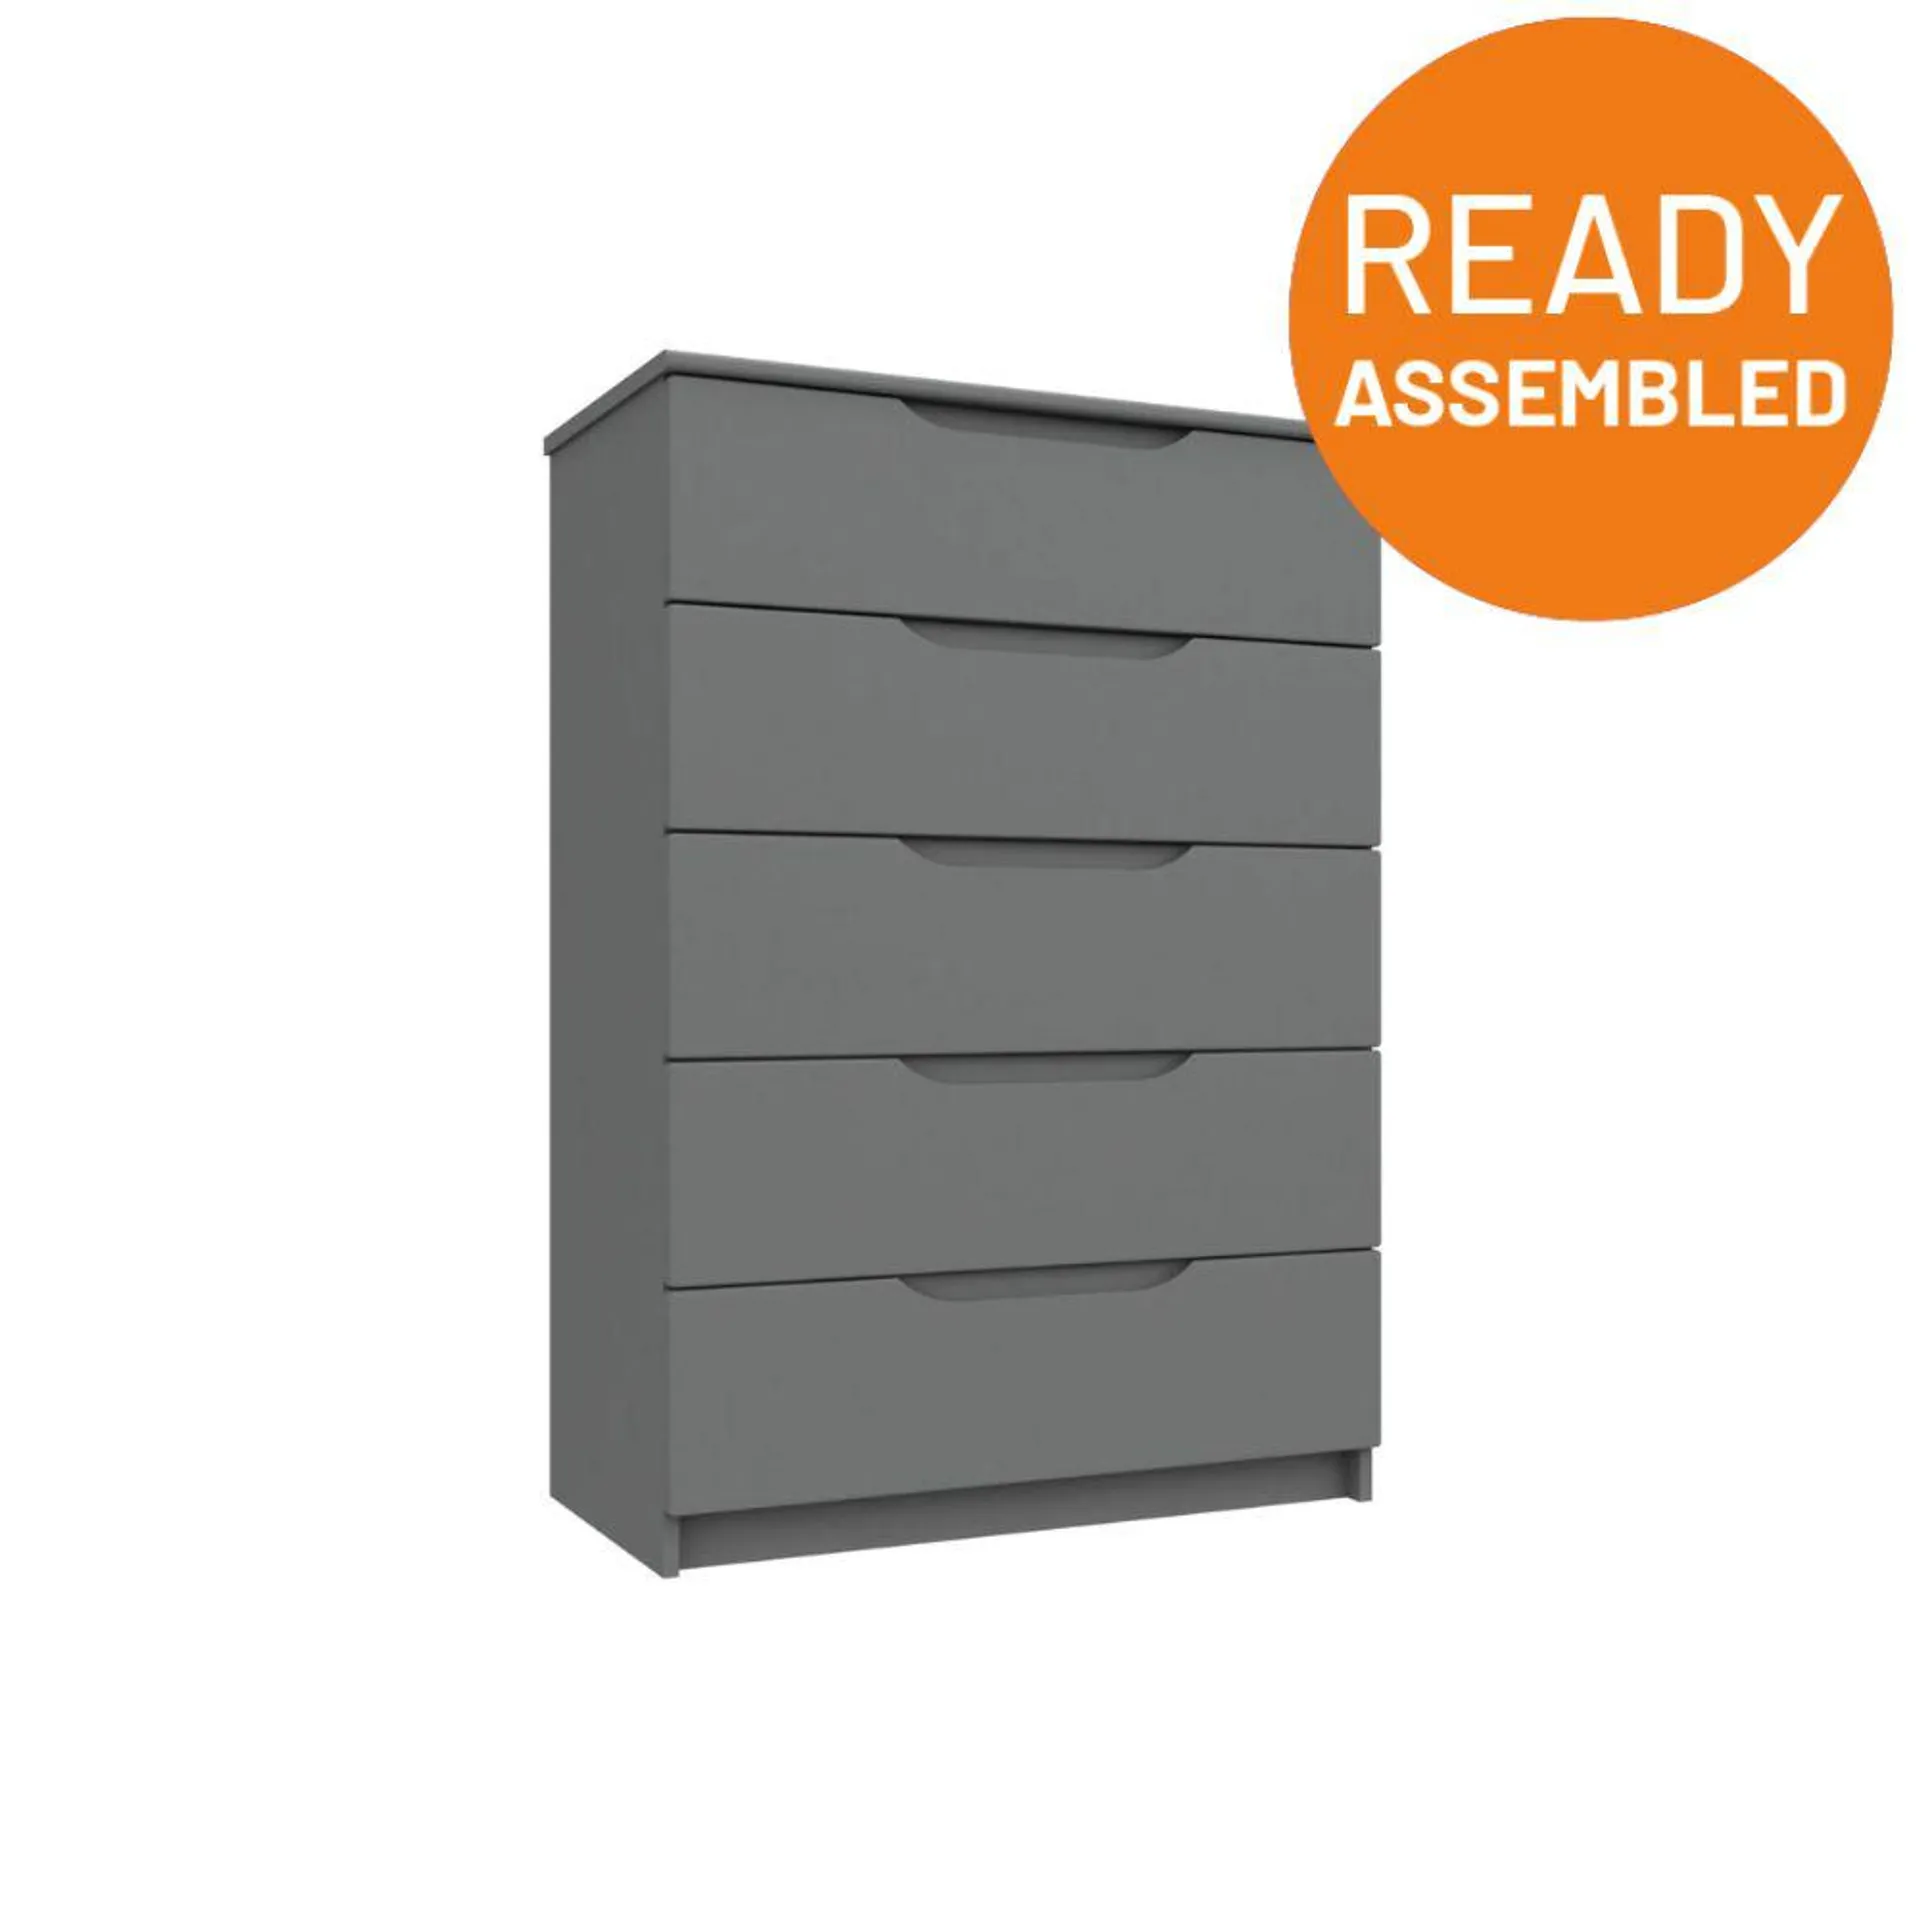 Balagio Ready Assembled Chest of Drawers with 5 Drawers - Dusk Grey Gloss